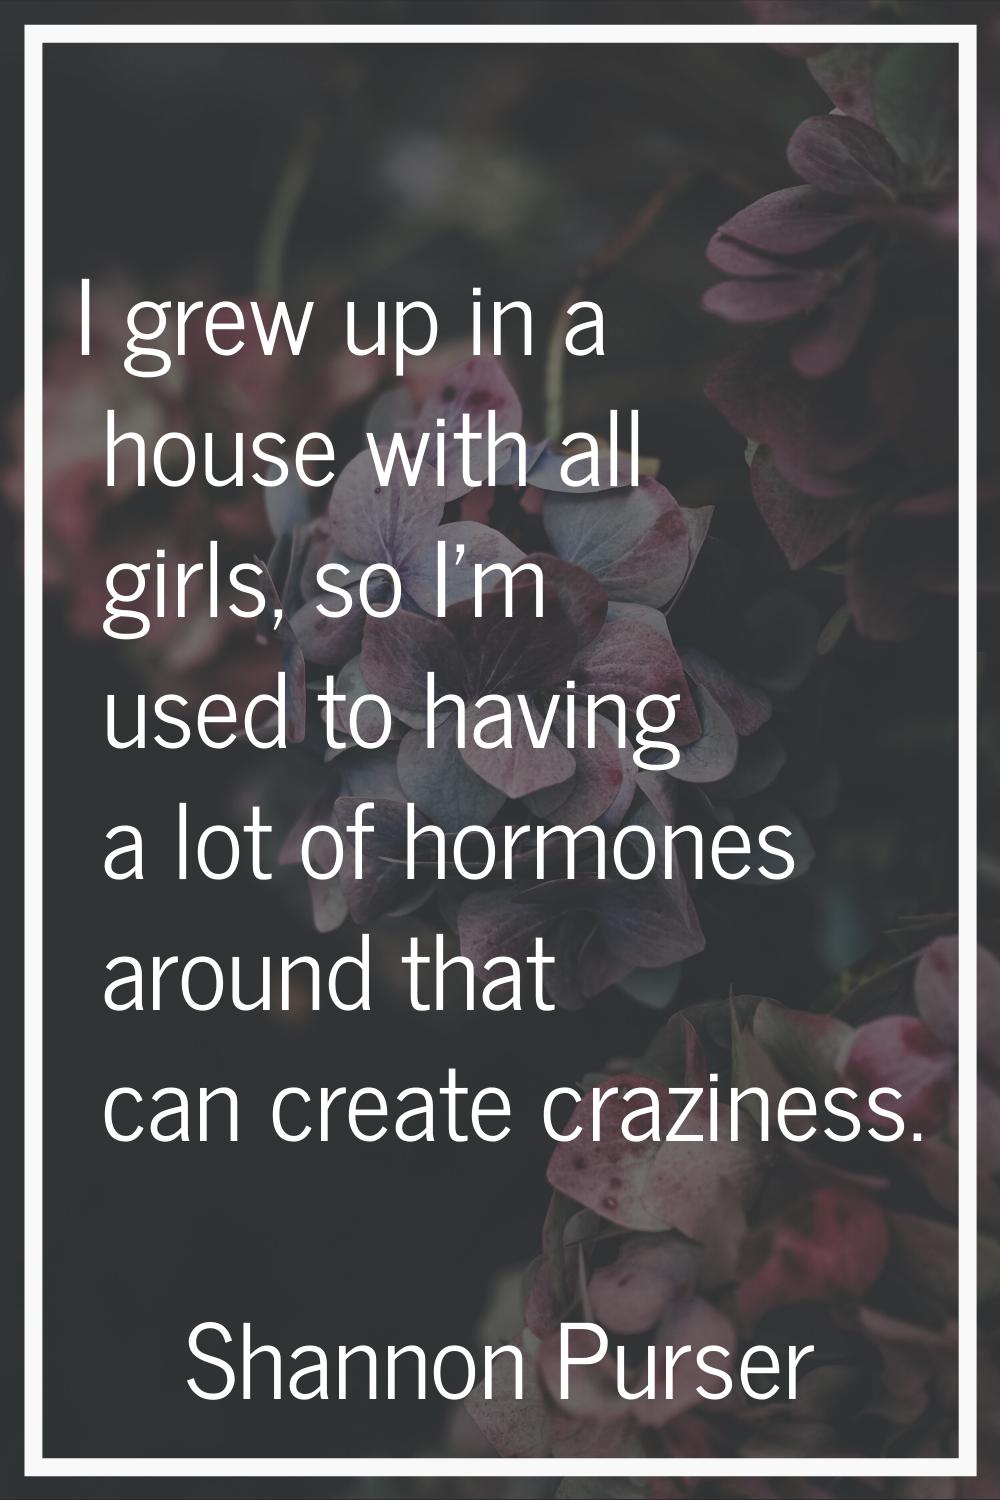 I grew up in a house with all girls, so I'm used to having a lot of hormones around that can create